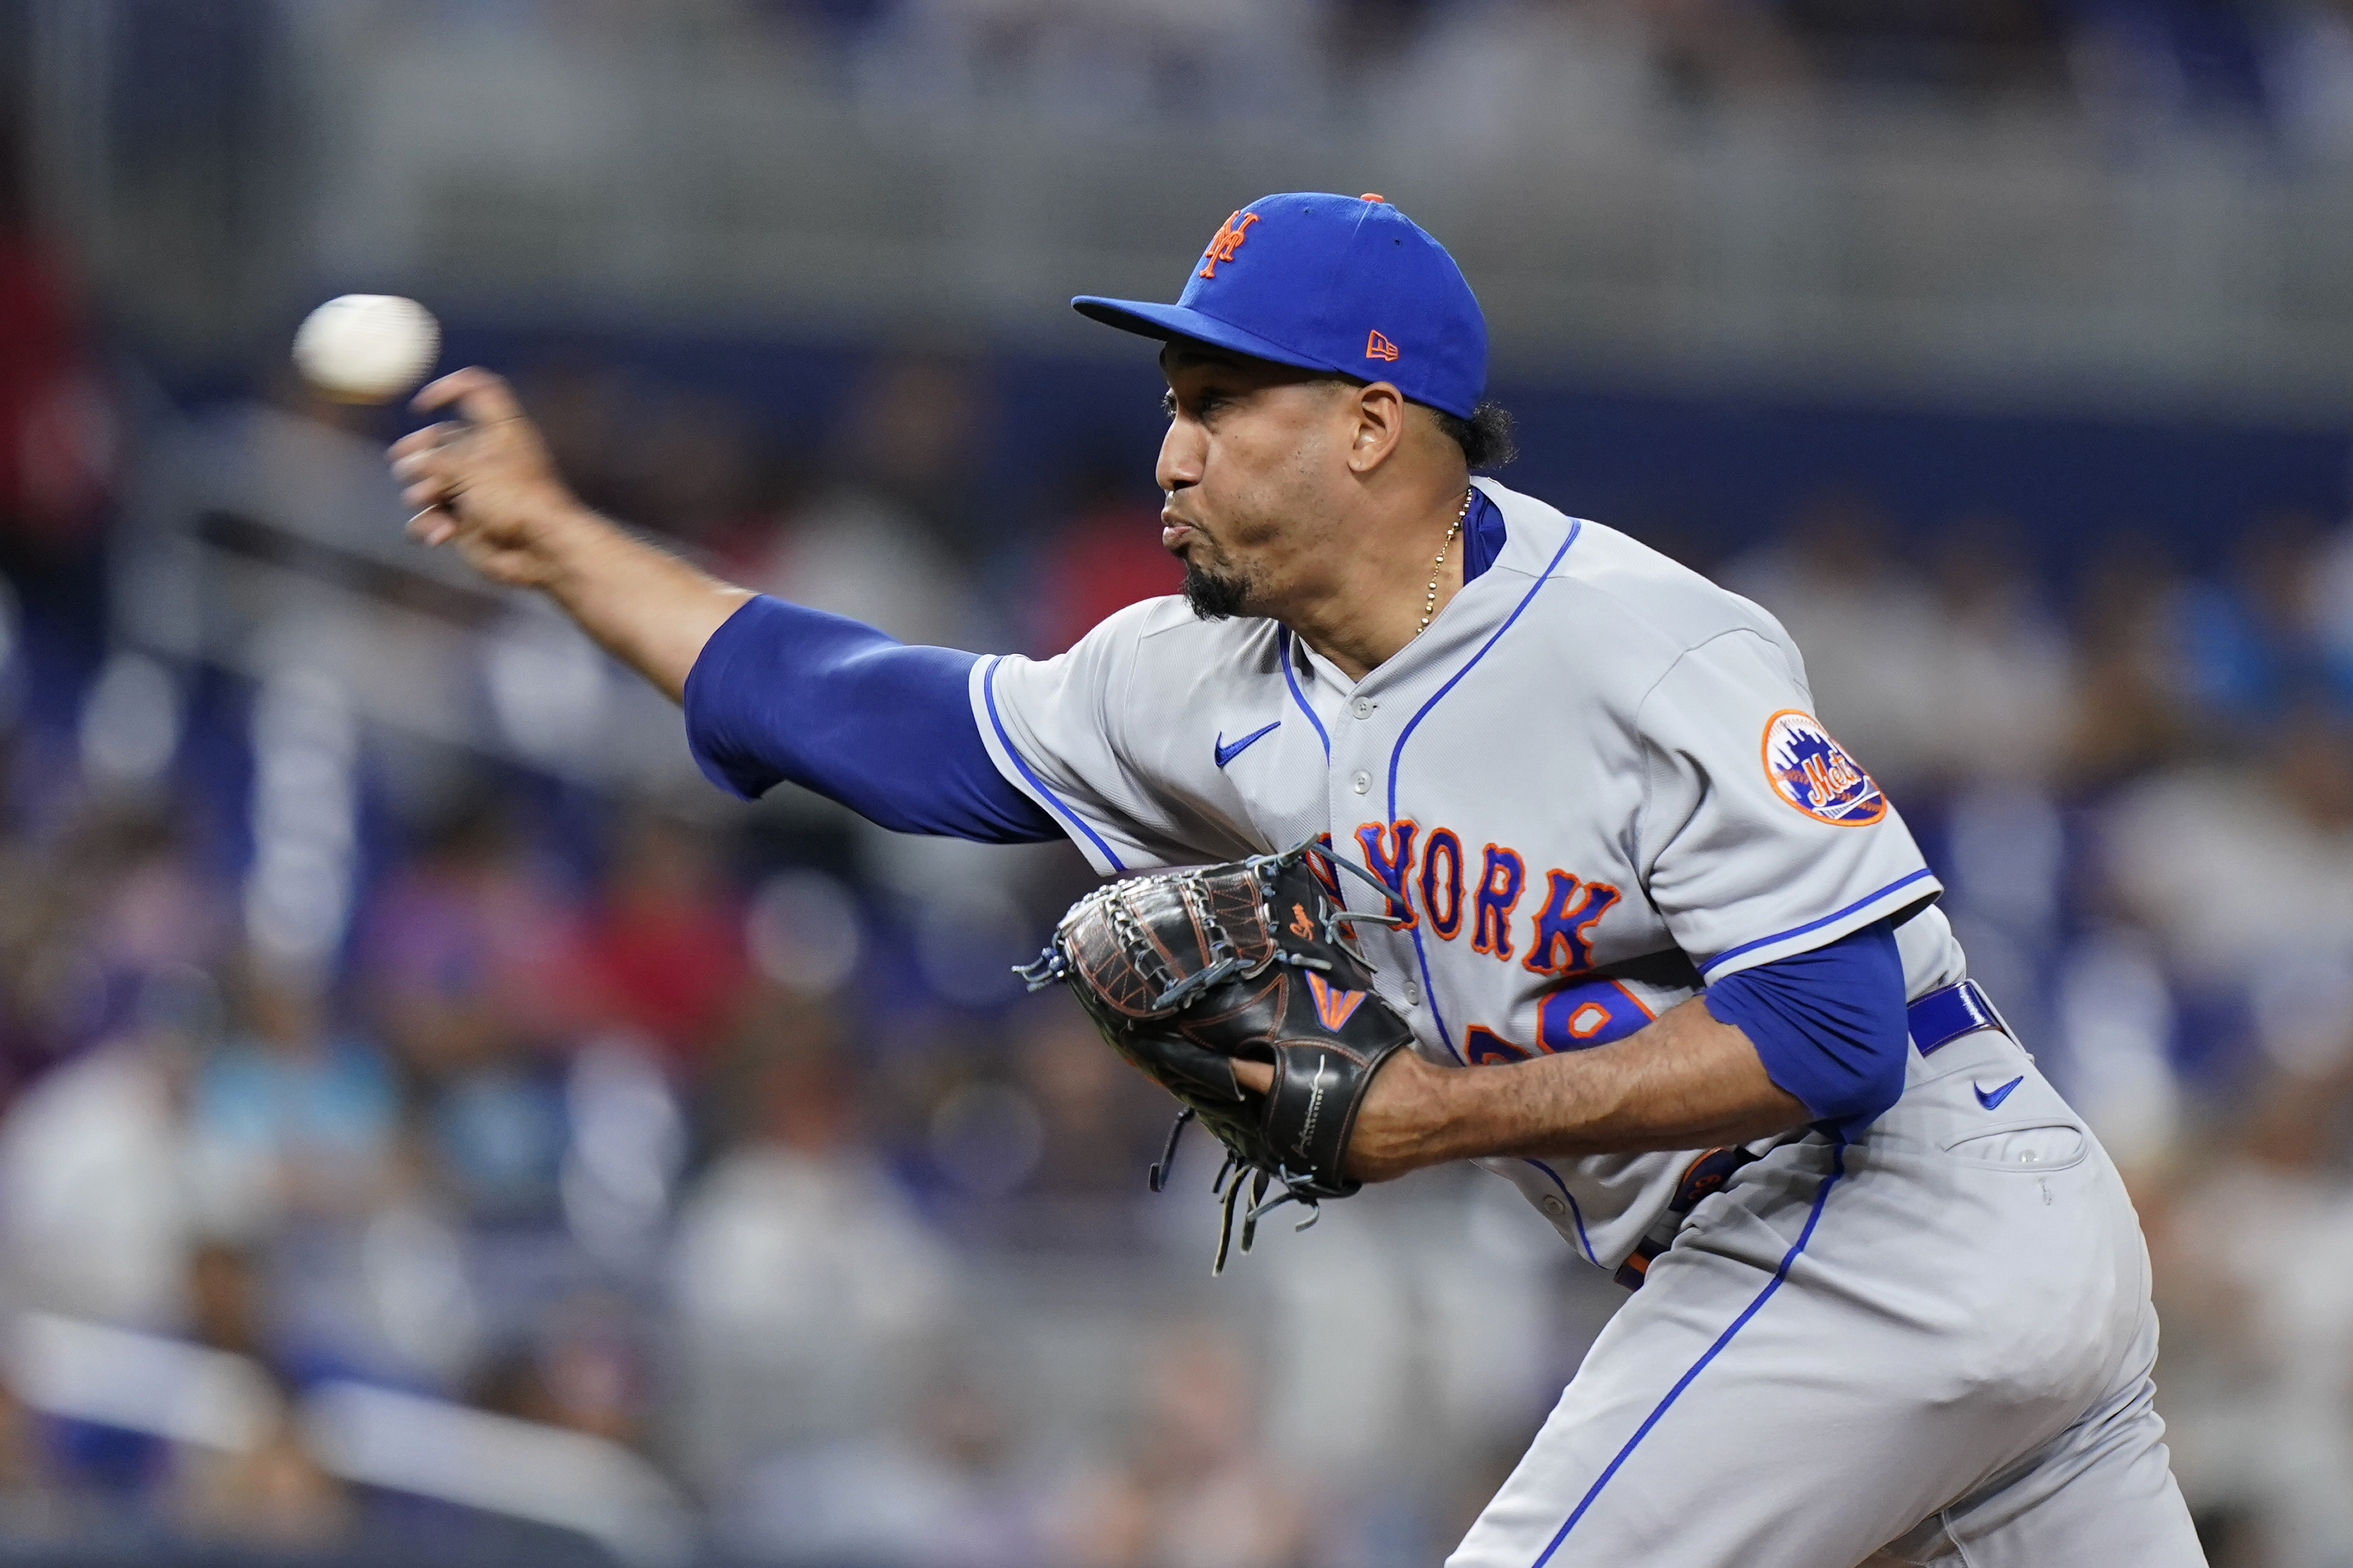 VIDEO: NY Mets Star Pitcher Edwin Diaz Enters Ballpark to His